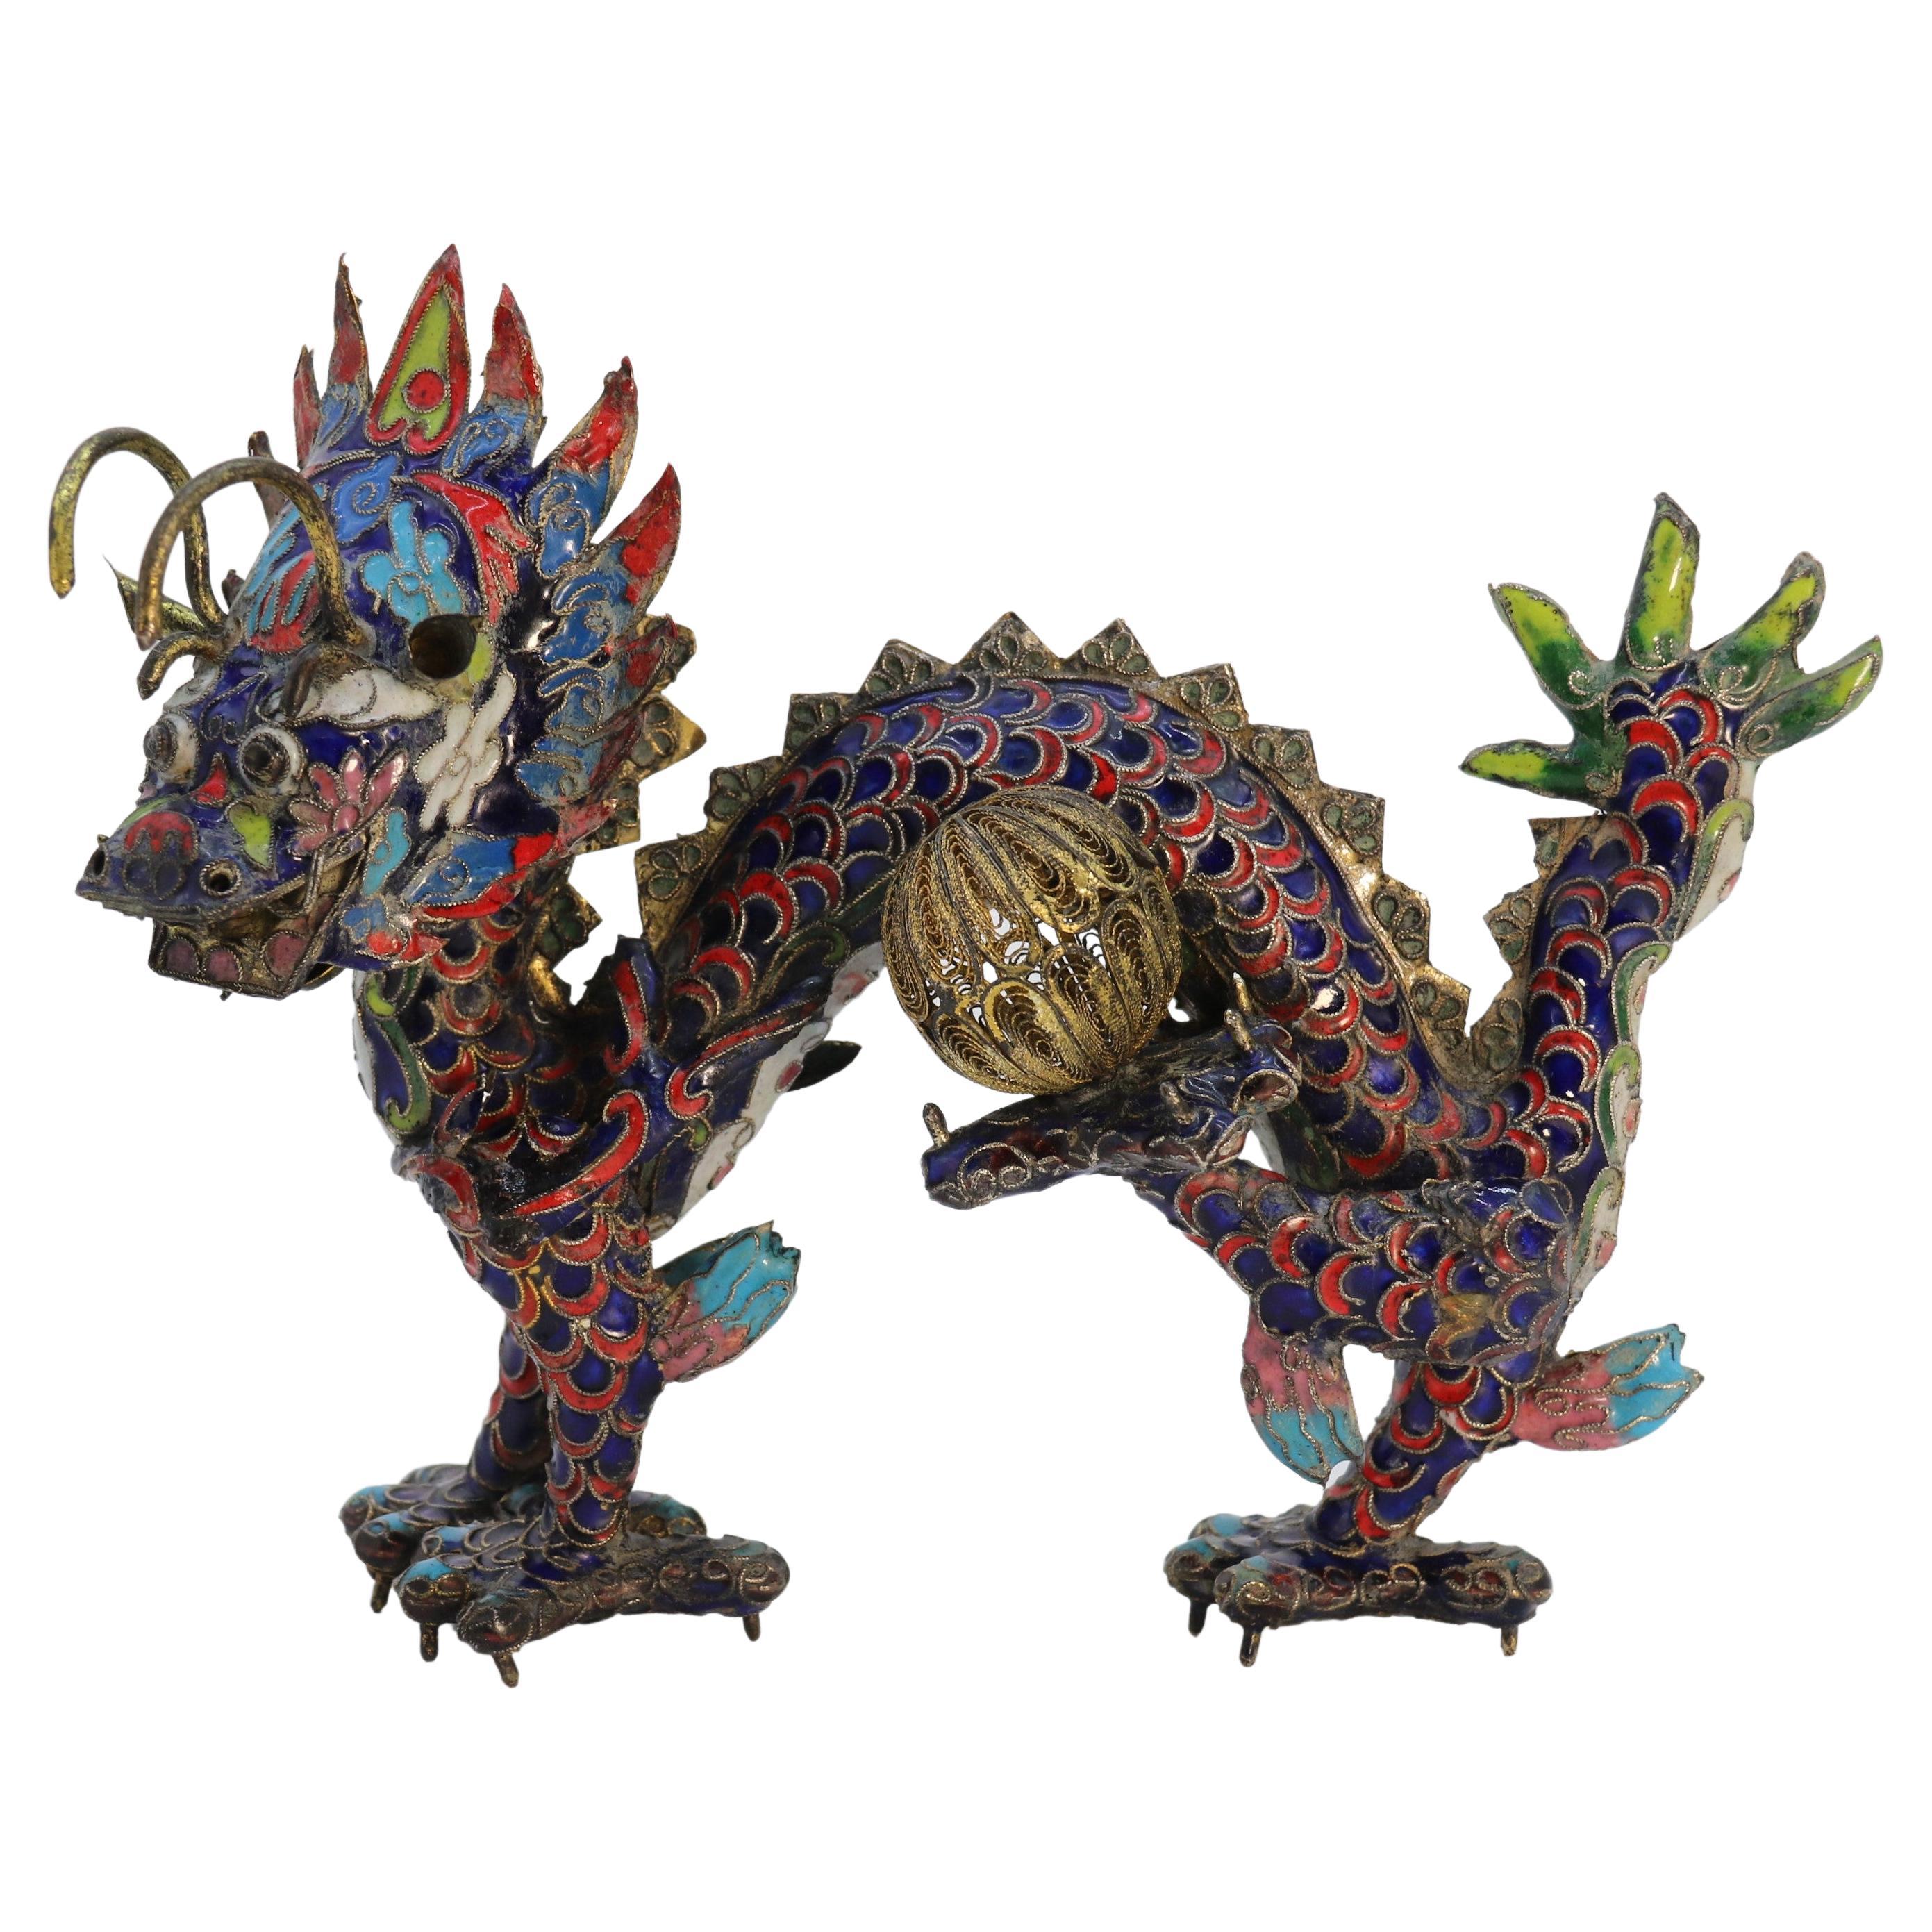 An early 20th century Chinese cloisonne sculpture of a five clawed dragon c 1930